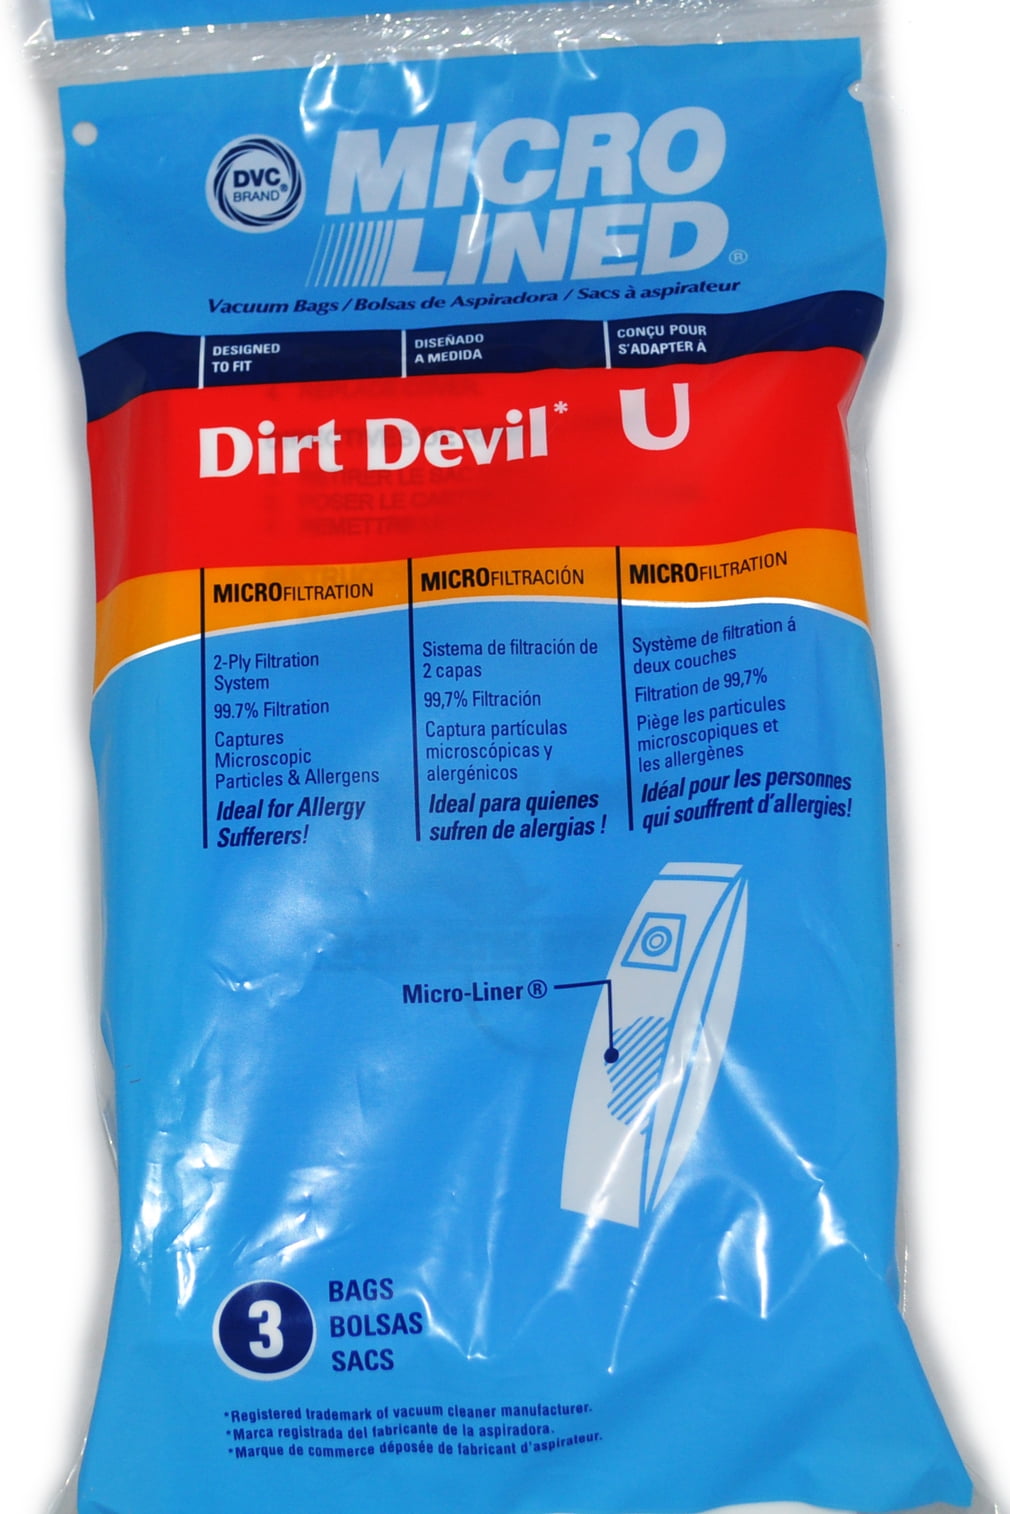 8 Bags NEW Details about   Dirt Devil Nautavac Vacuum Bags Style 382 Type U Micro Filtration 